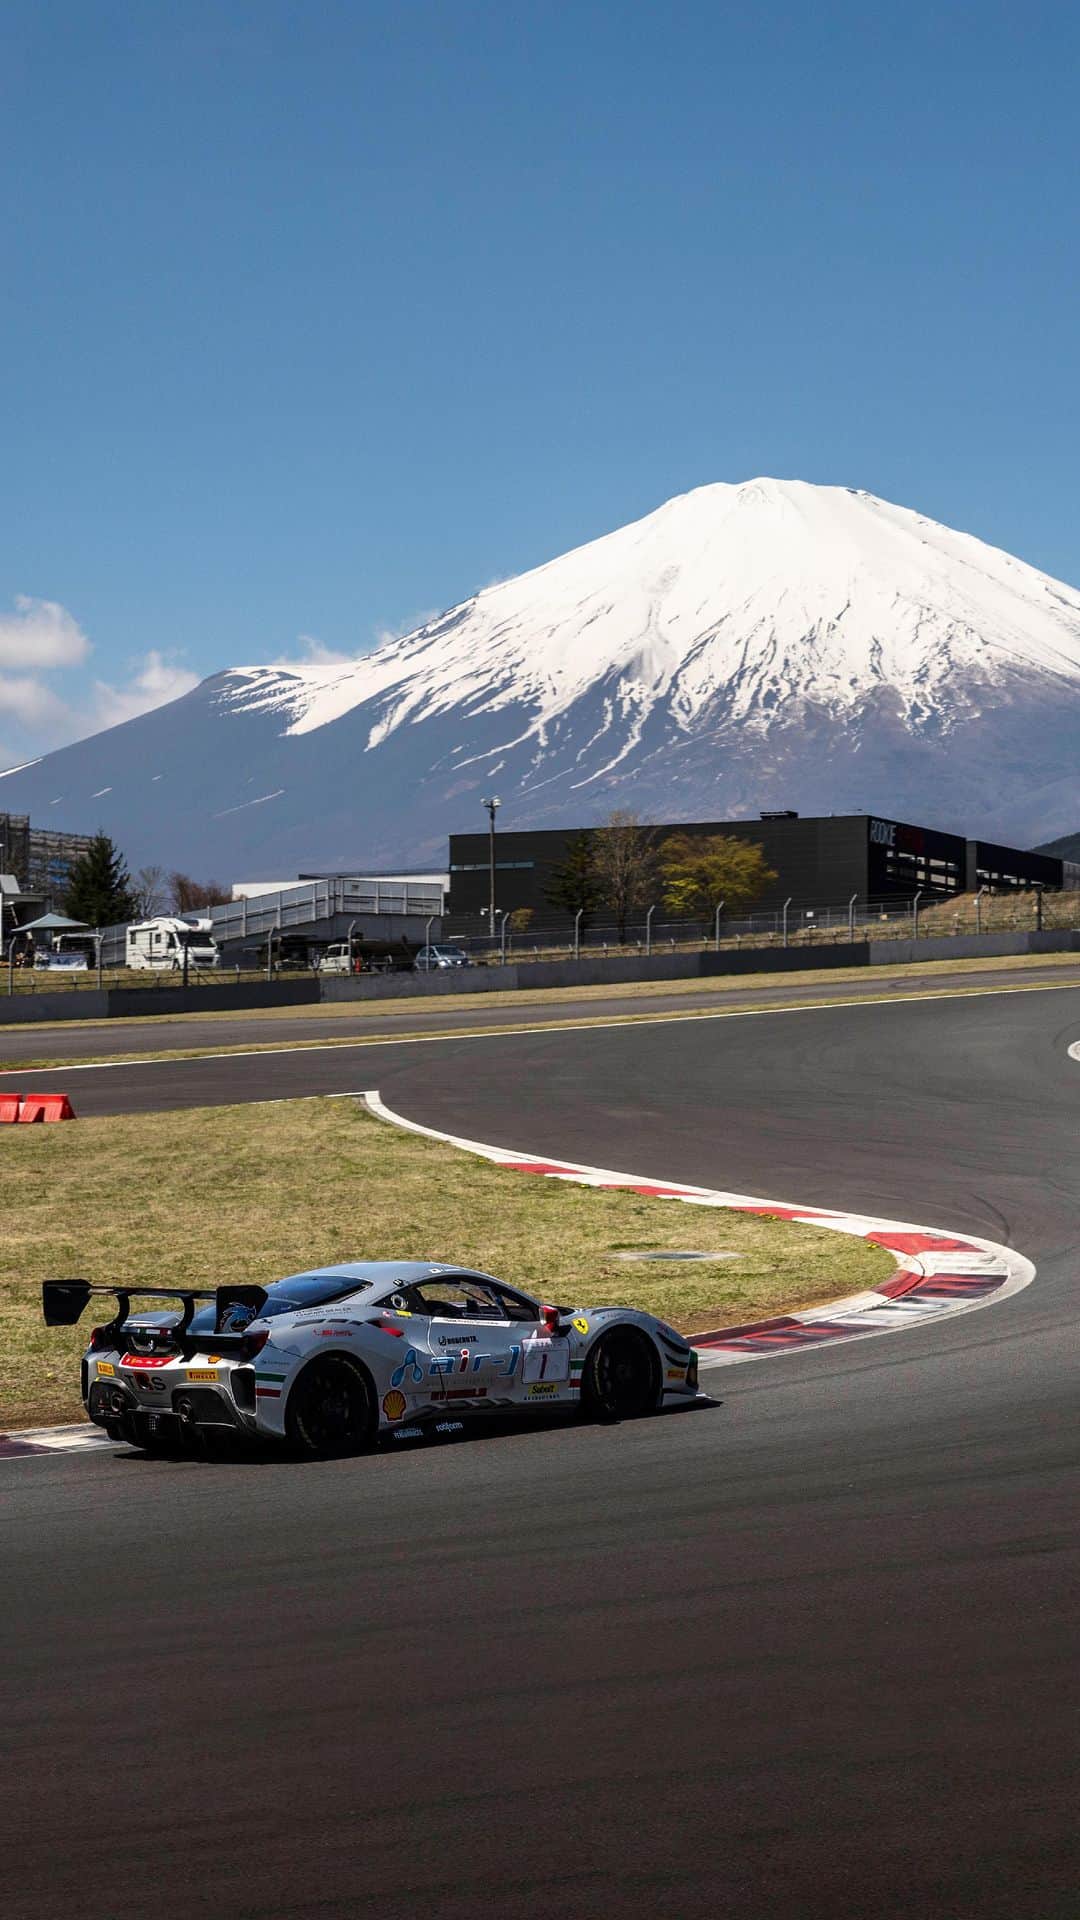 Ferrari APACのインスタグラム：「A formidable display of relentless willpower and extreme horsepower last weekend at Fuji Speedway, where the all-new #FerrariChallengeJapan series kicked off its inaugural race. Adrenaline-filled action, heading your way — the upcoming races will keep you on the edge of your seats.⚡  Next stop: Autopolis, 6 – 7 May 🇯🇵」